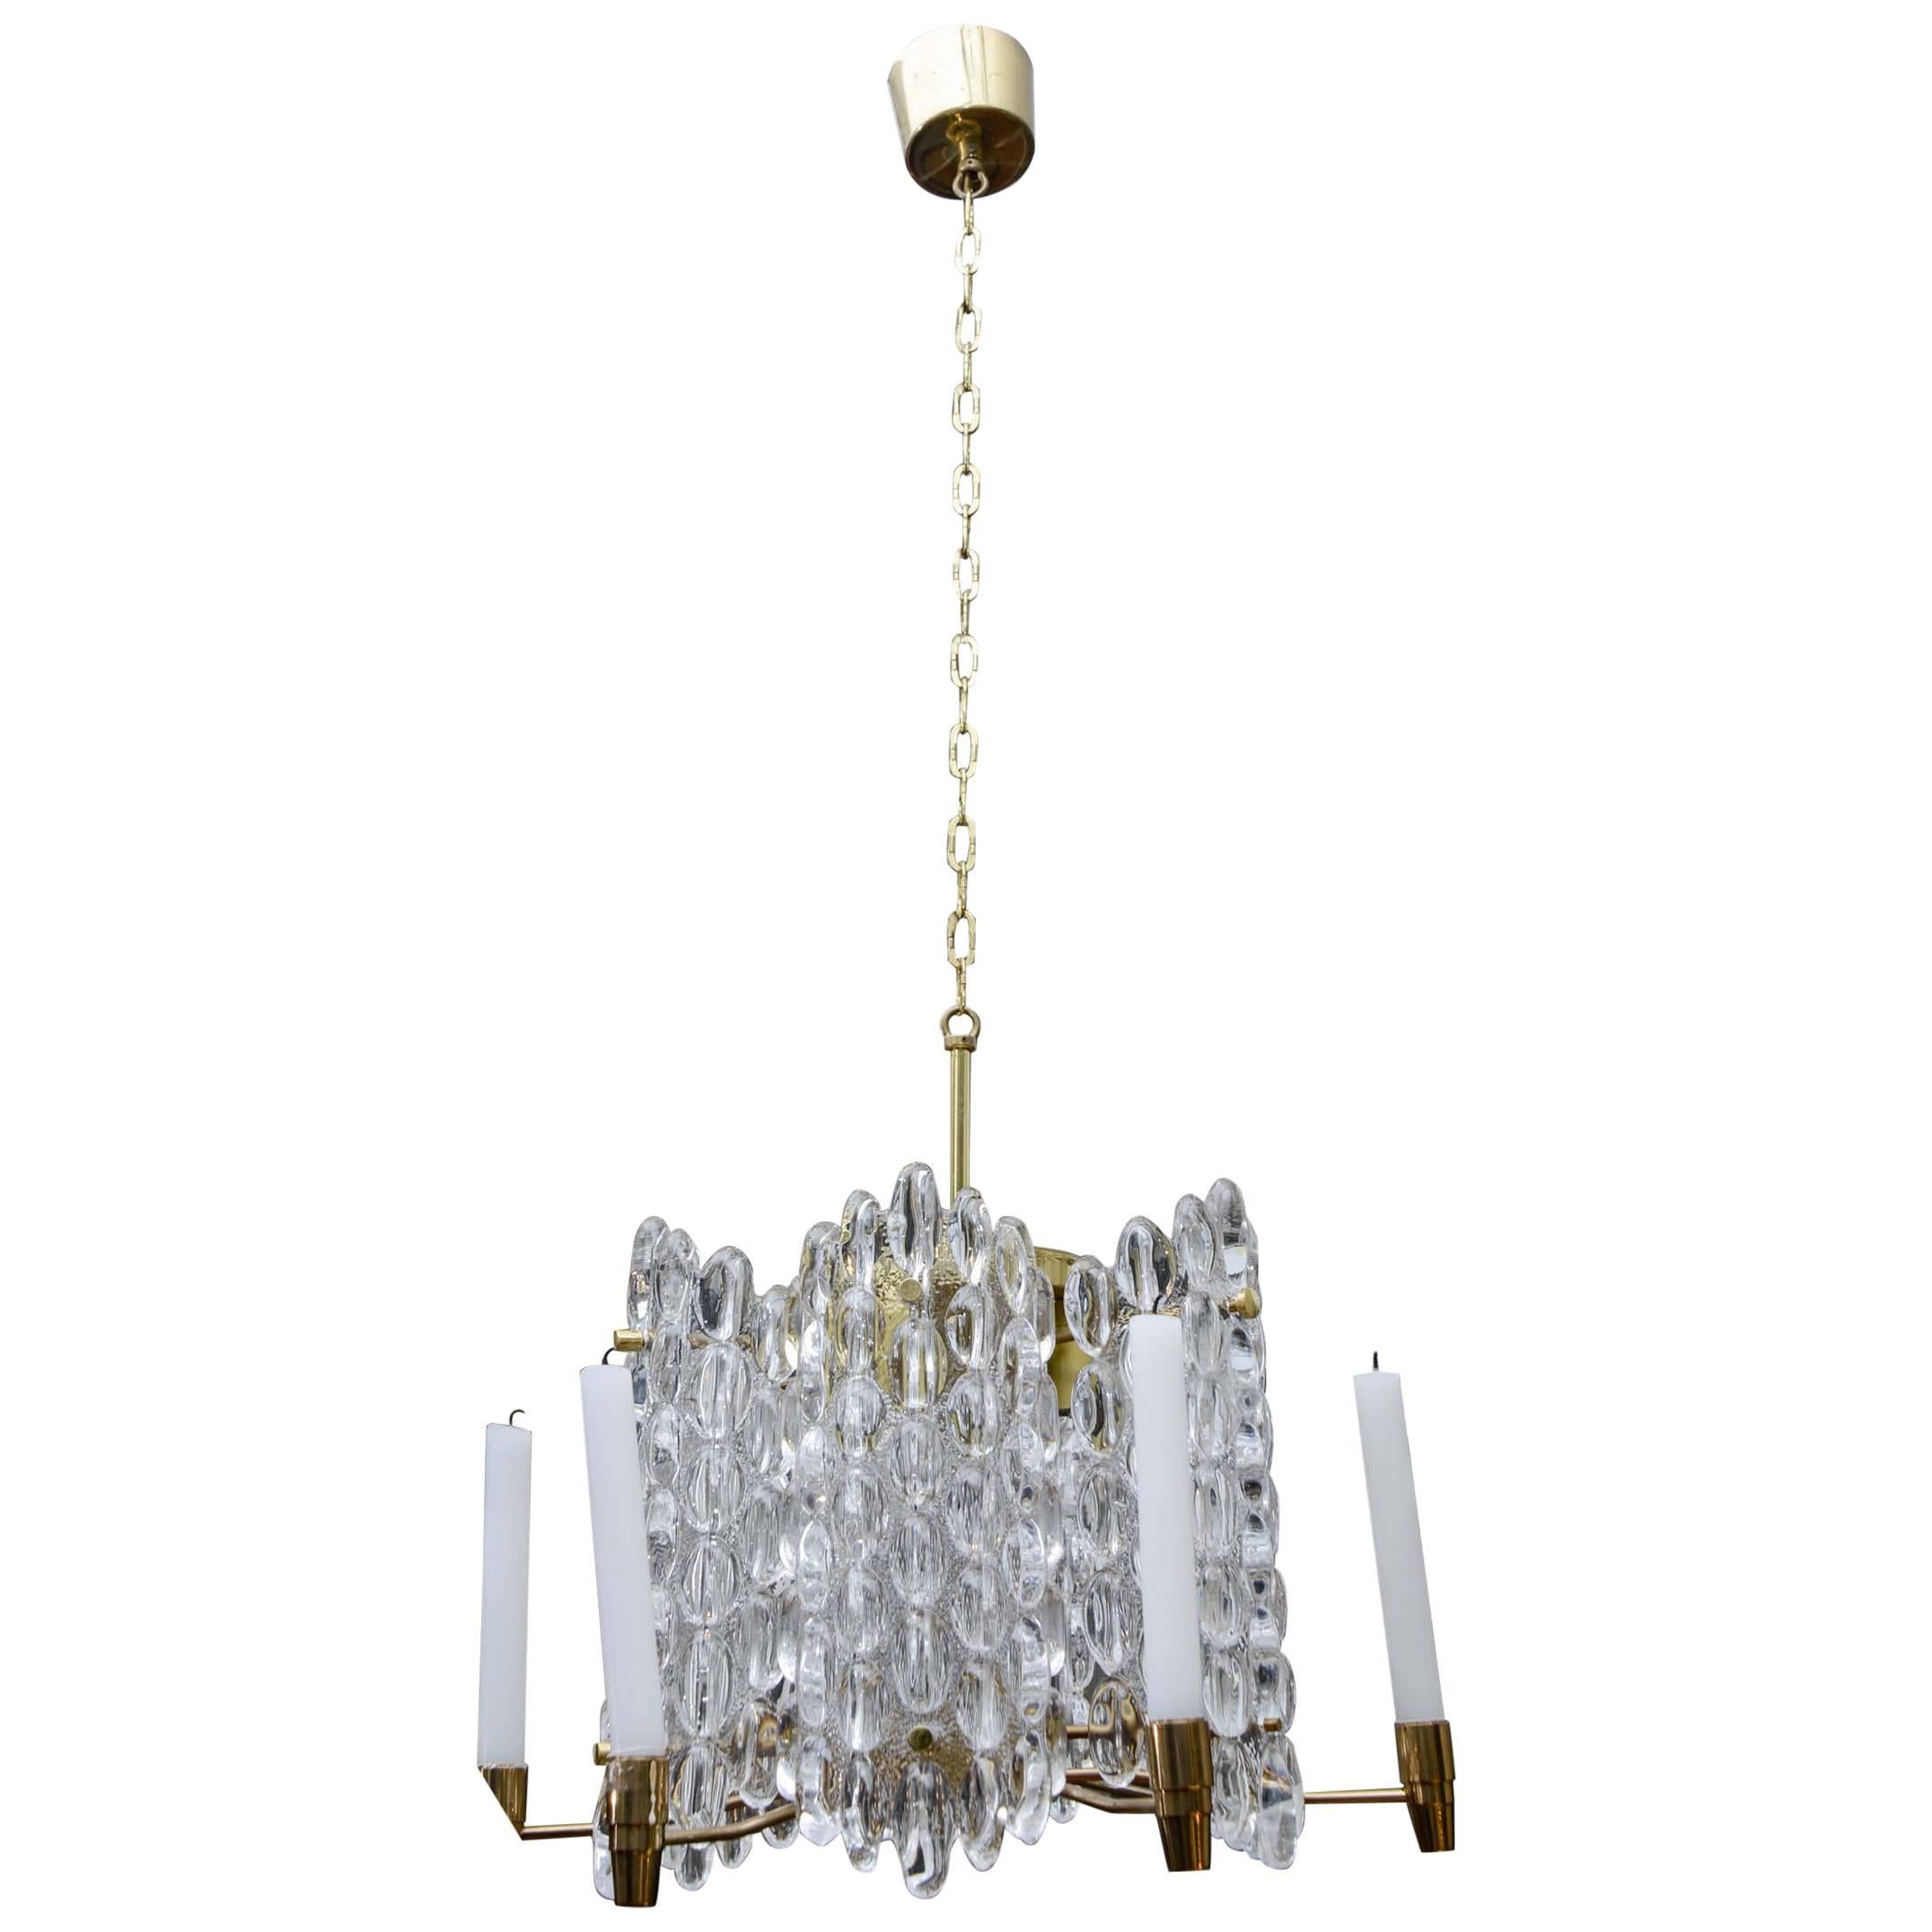 Brass and Crystal Chandelier with Both Electrical and Candles Light For Sale